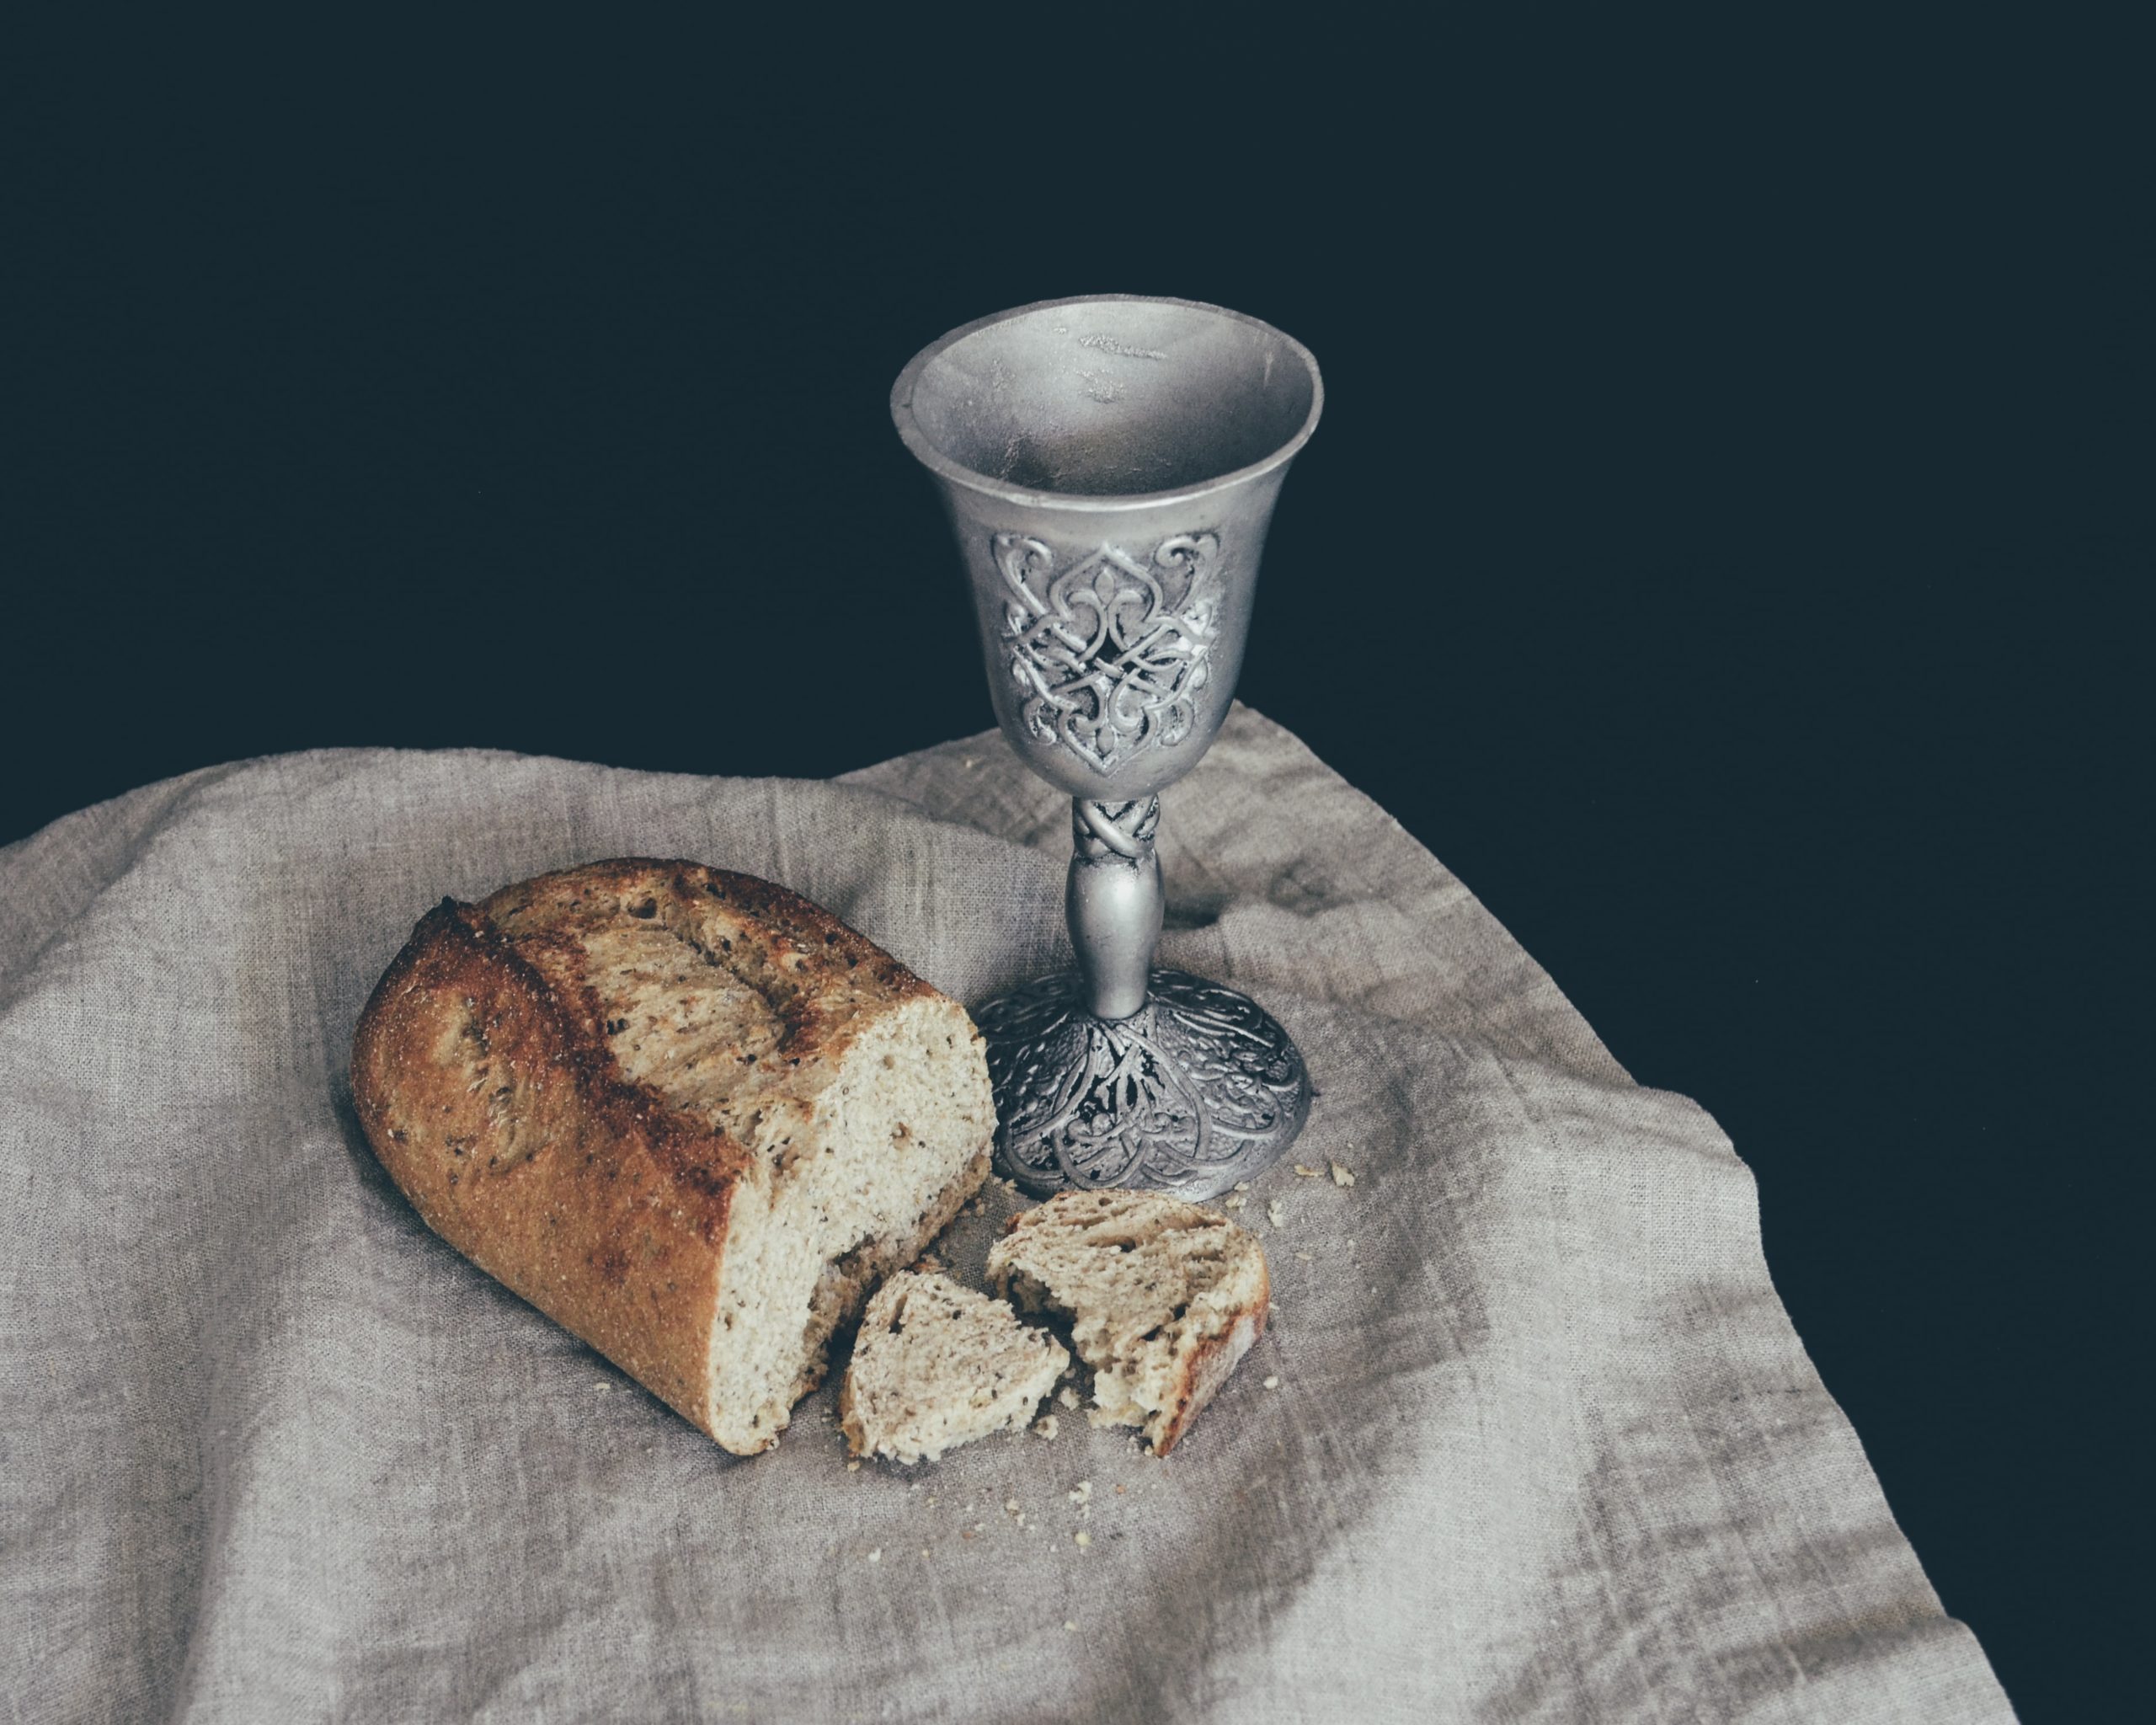 piece of bread with goblet on white cloth